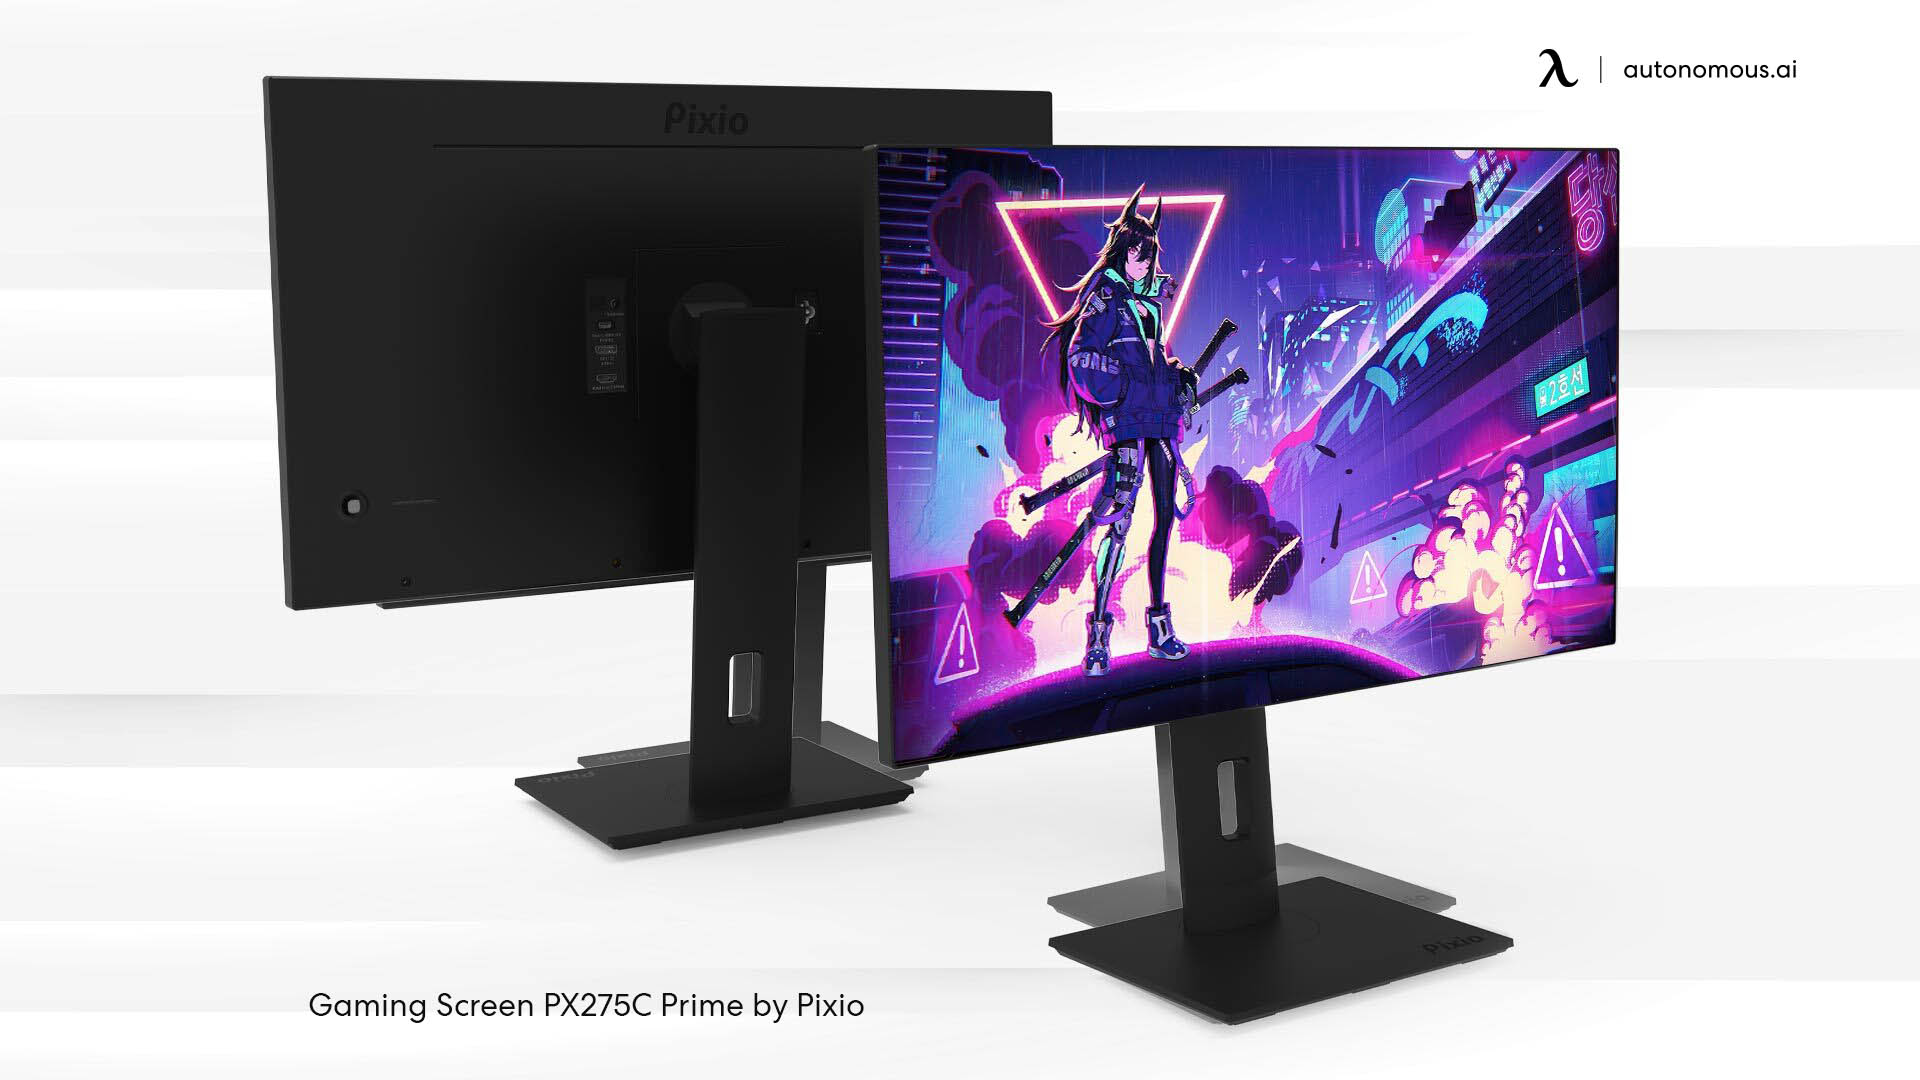 Gaming screen PX275C Prime by Pixio